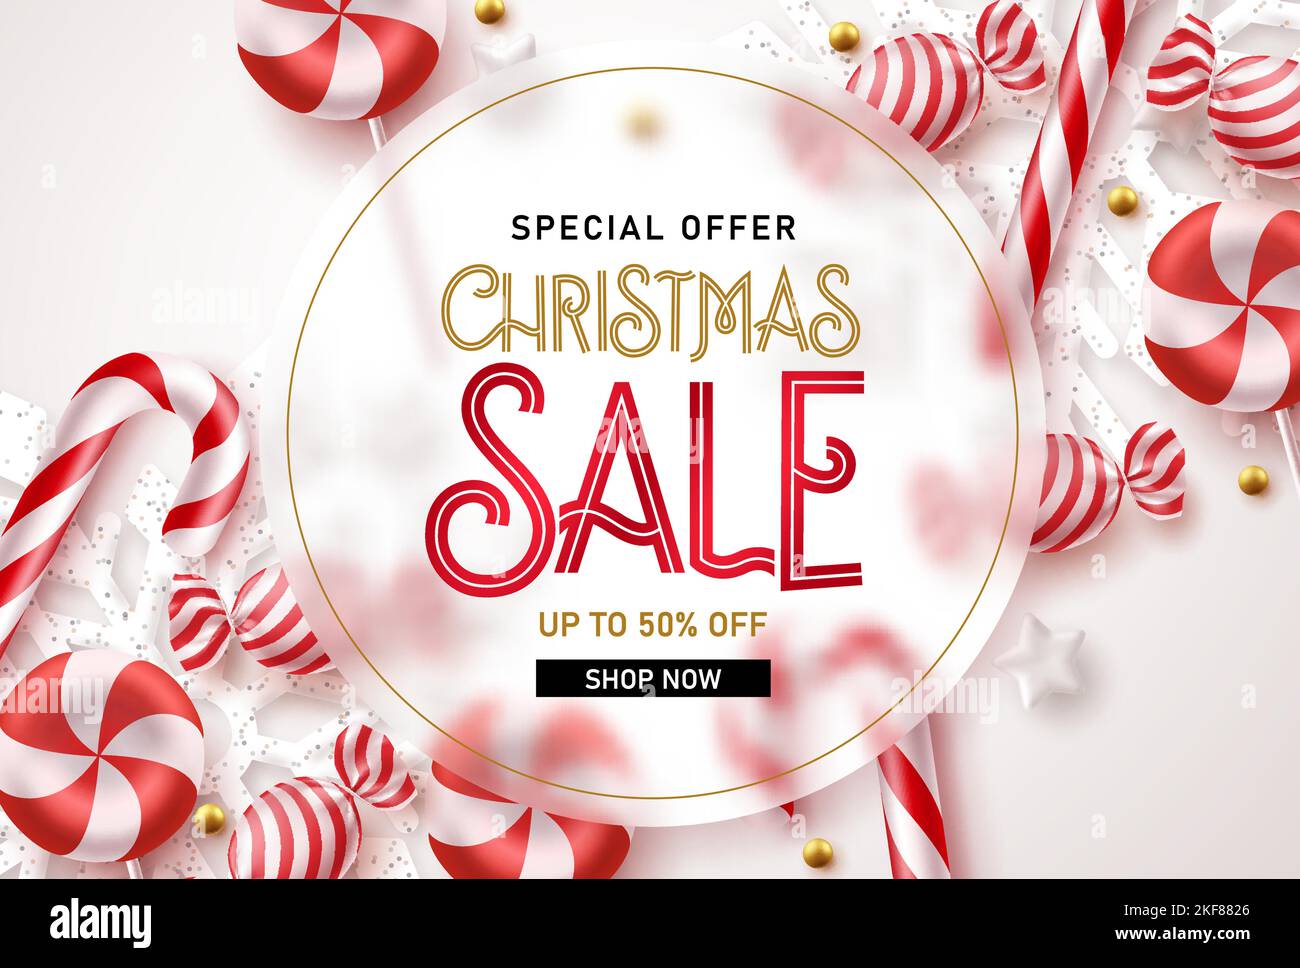 Christmas sale vector banner design. Merry christmas special offer text in empty space with snow flakes and candy cane for holiday season flyers. Stock Vector